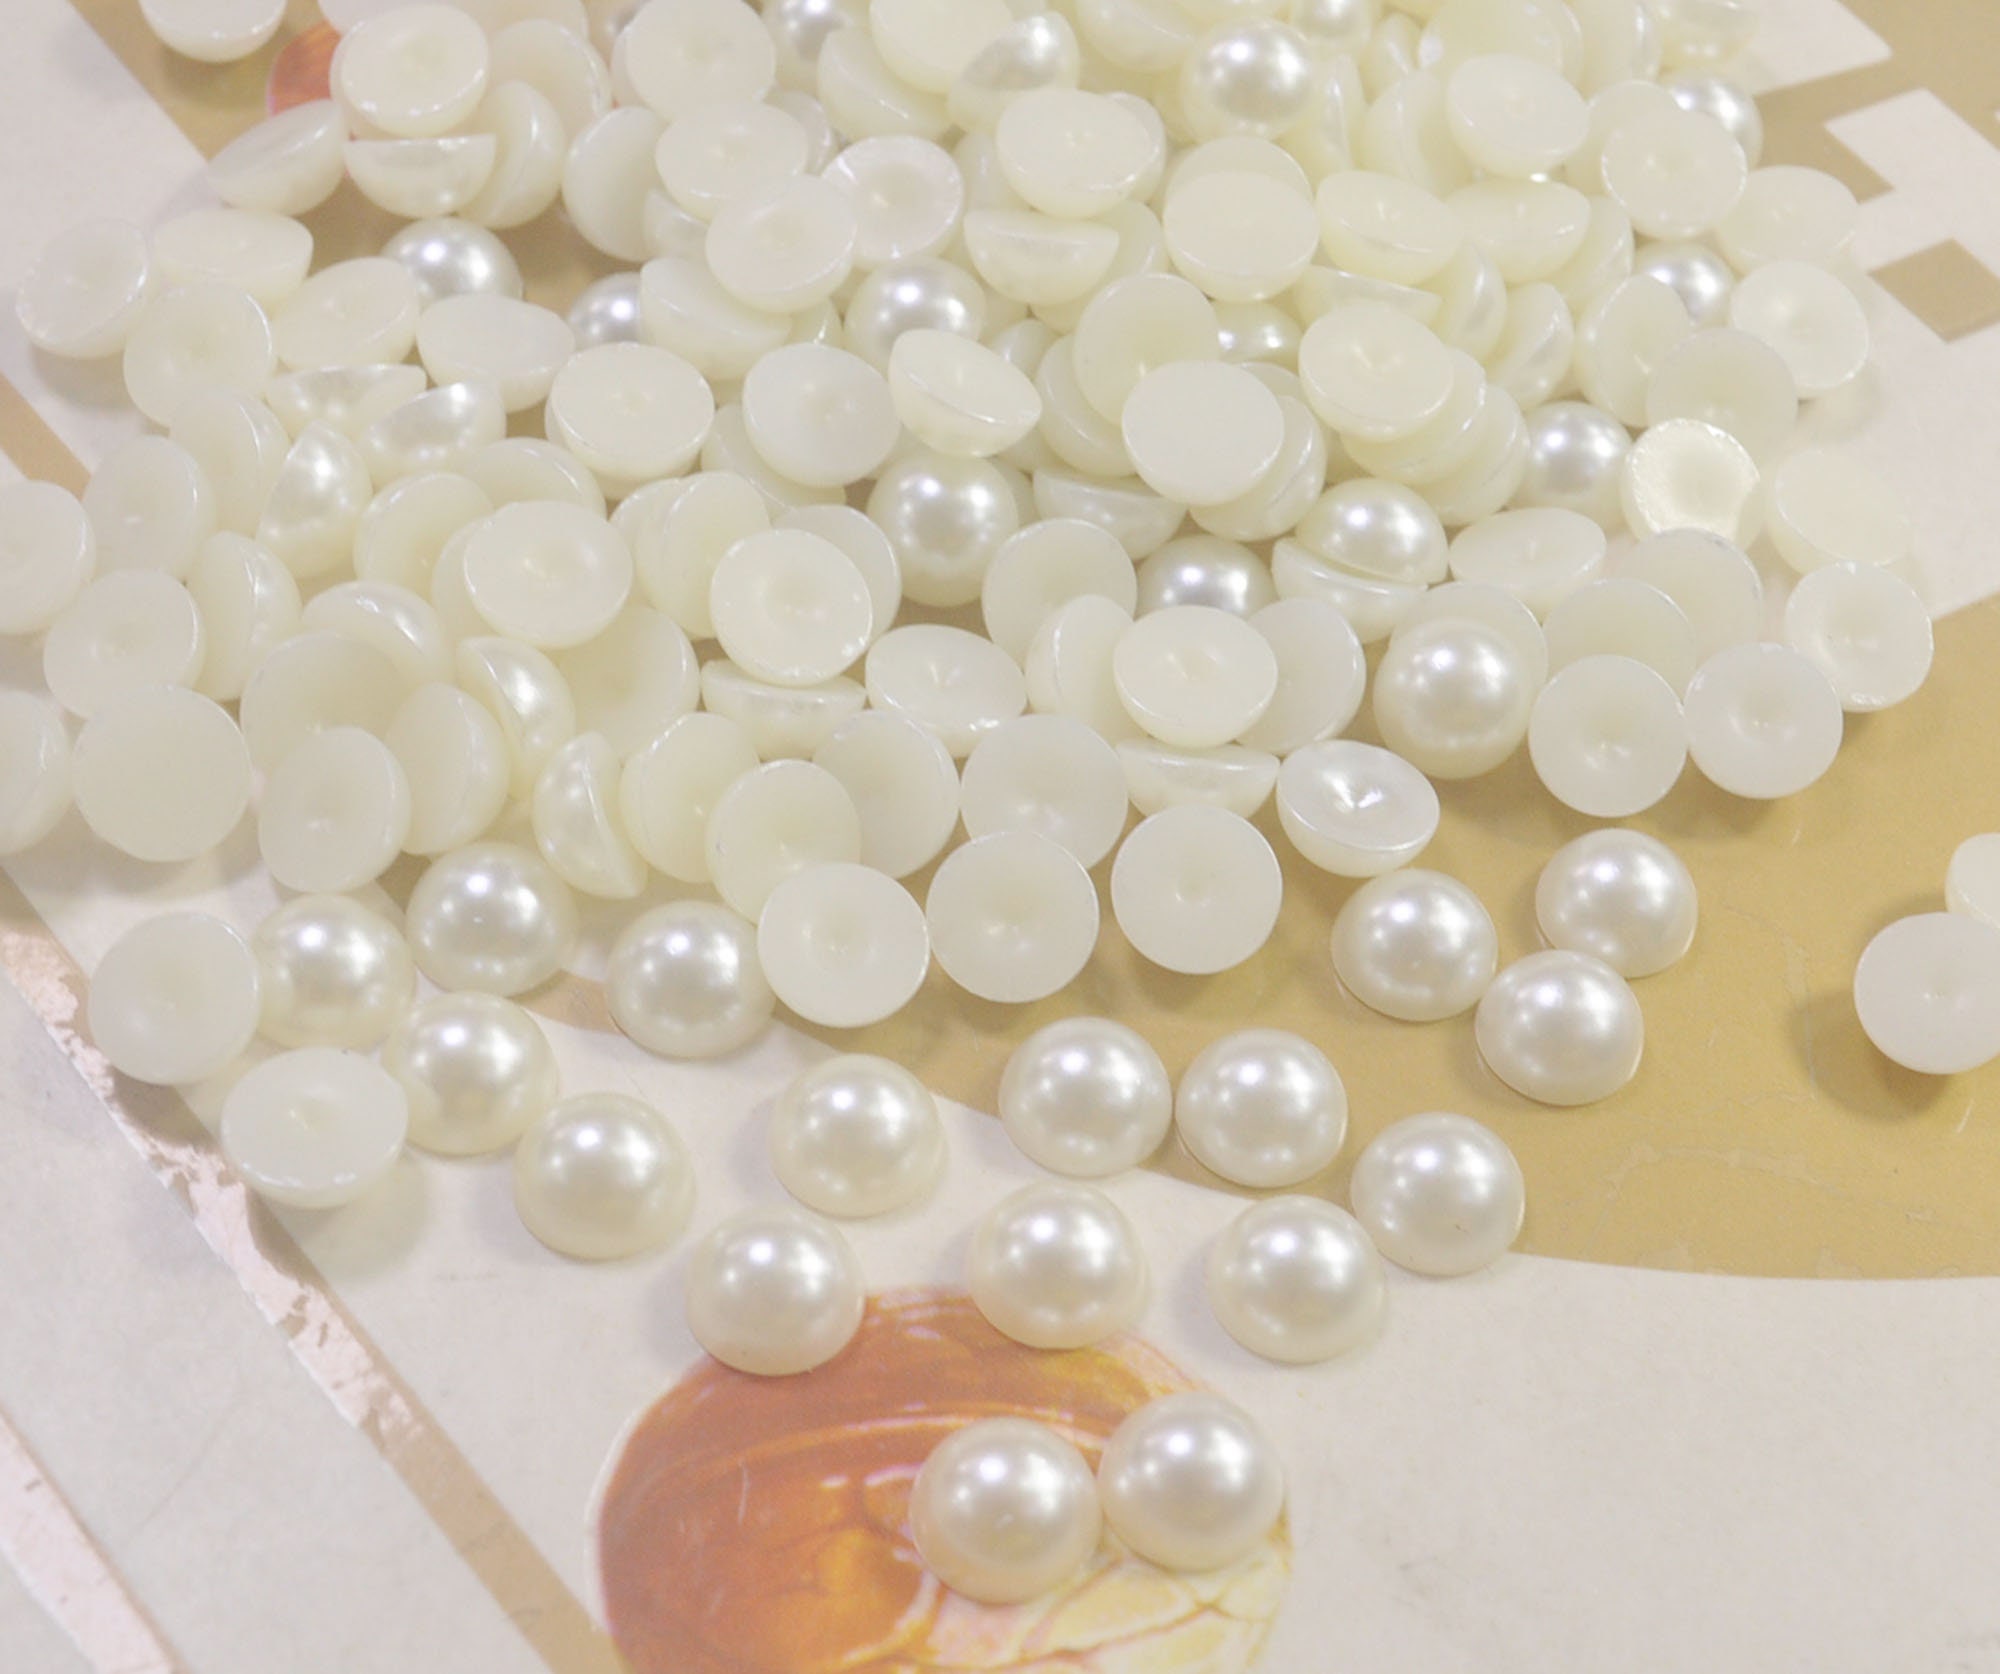  Mini Pearls Beads for Nail Crafts,10000pcs Half Round